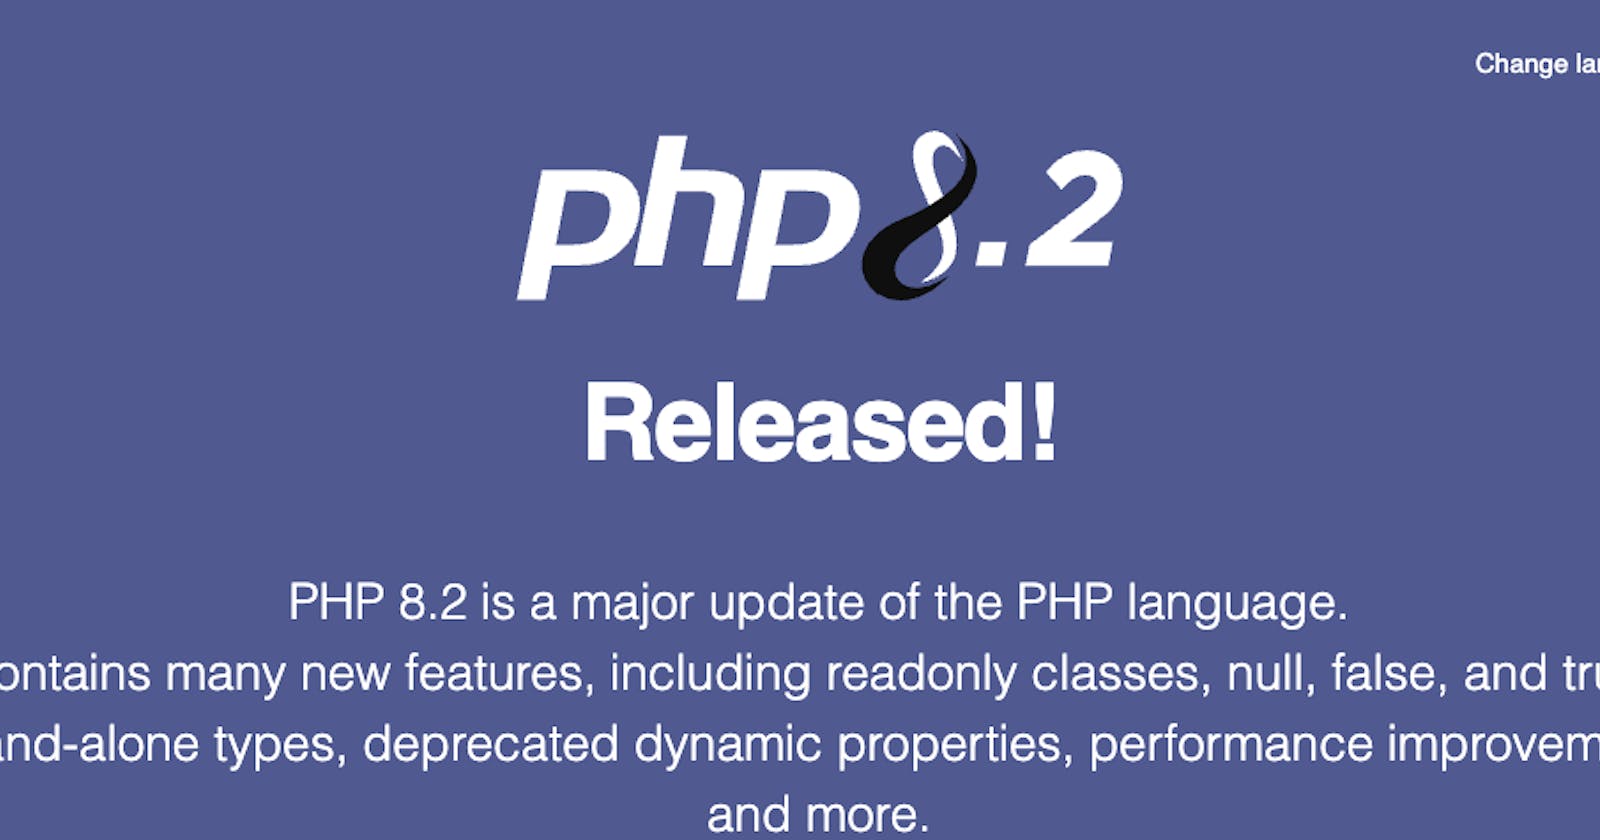 PHP8.2: the modern PHP